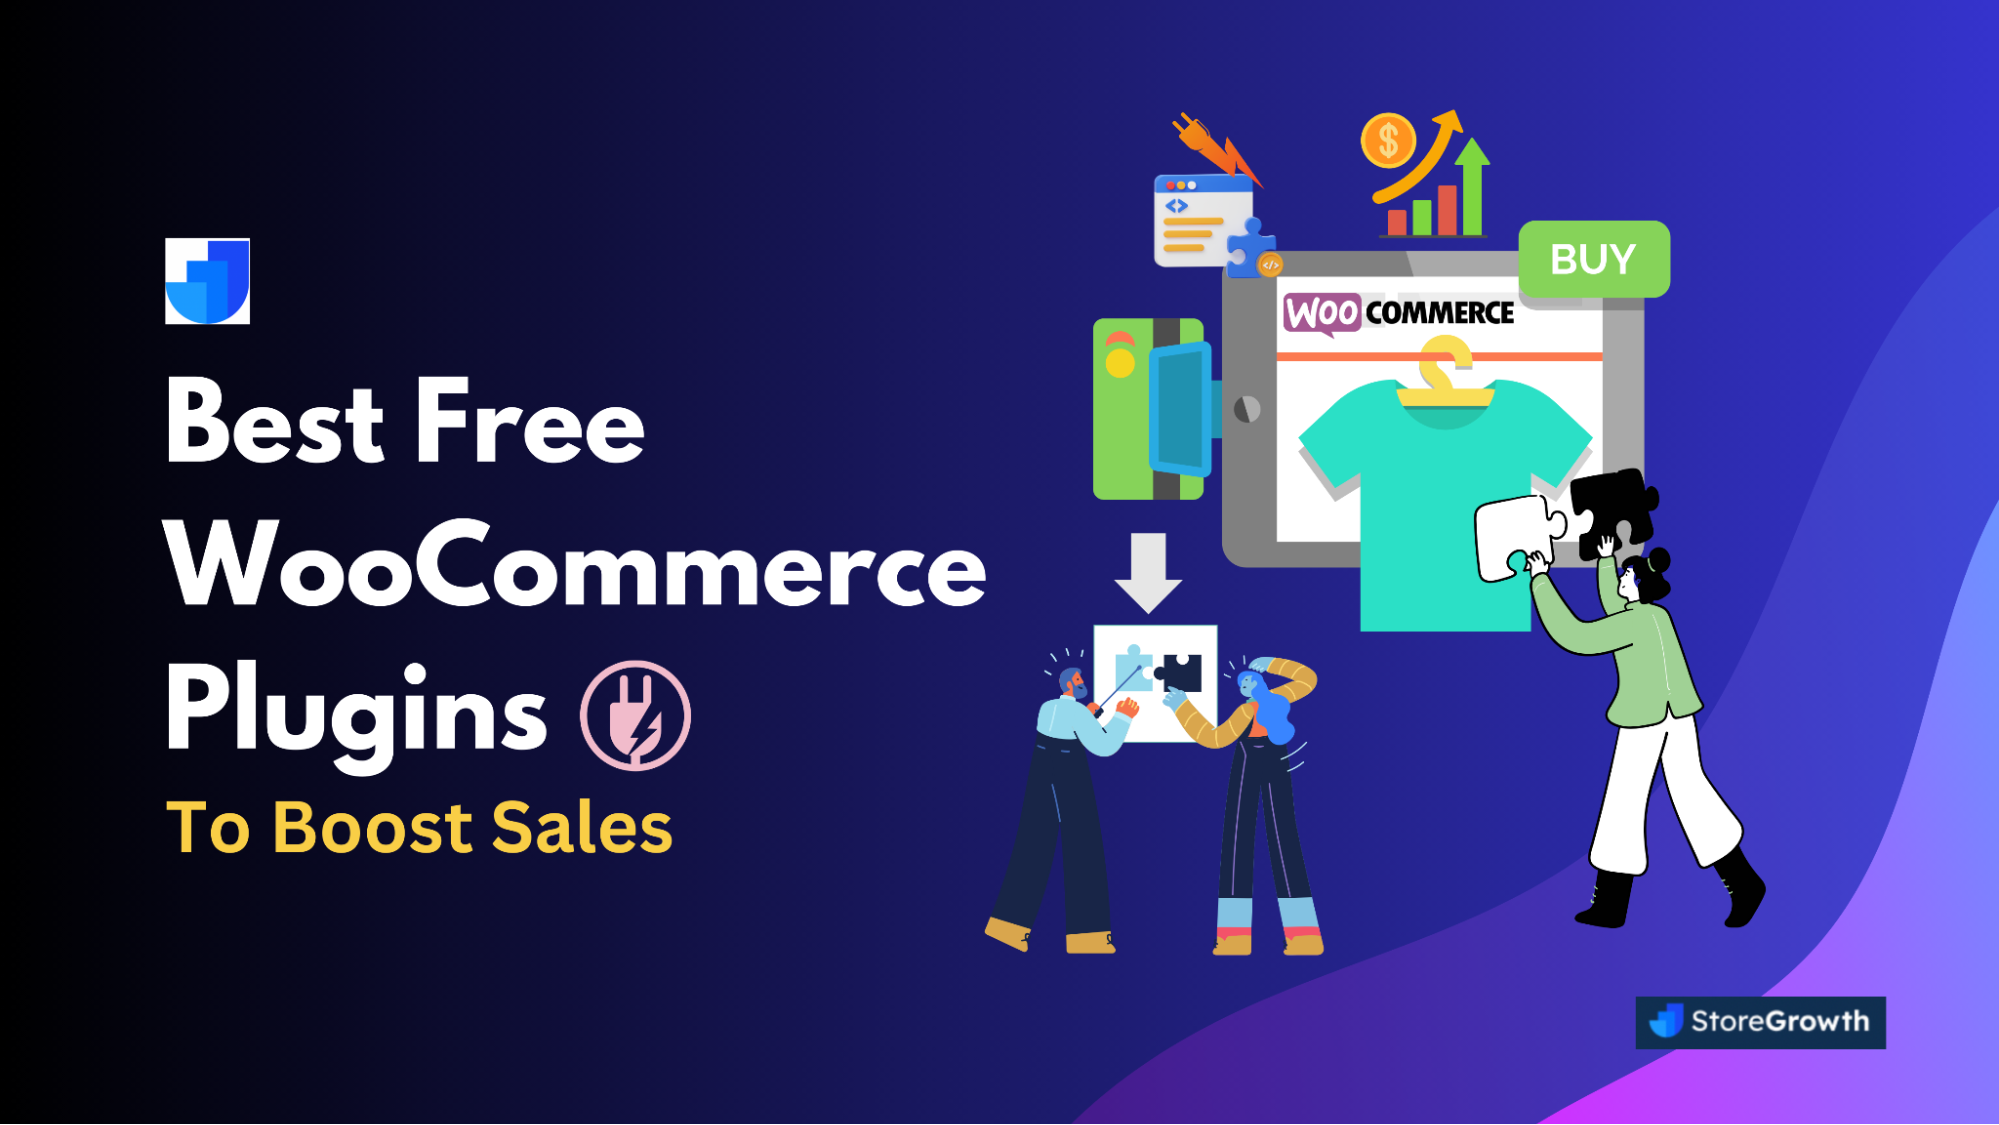 Best 5 Free WooCommerce Plugins to Increase Sales and Boost Revenue